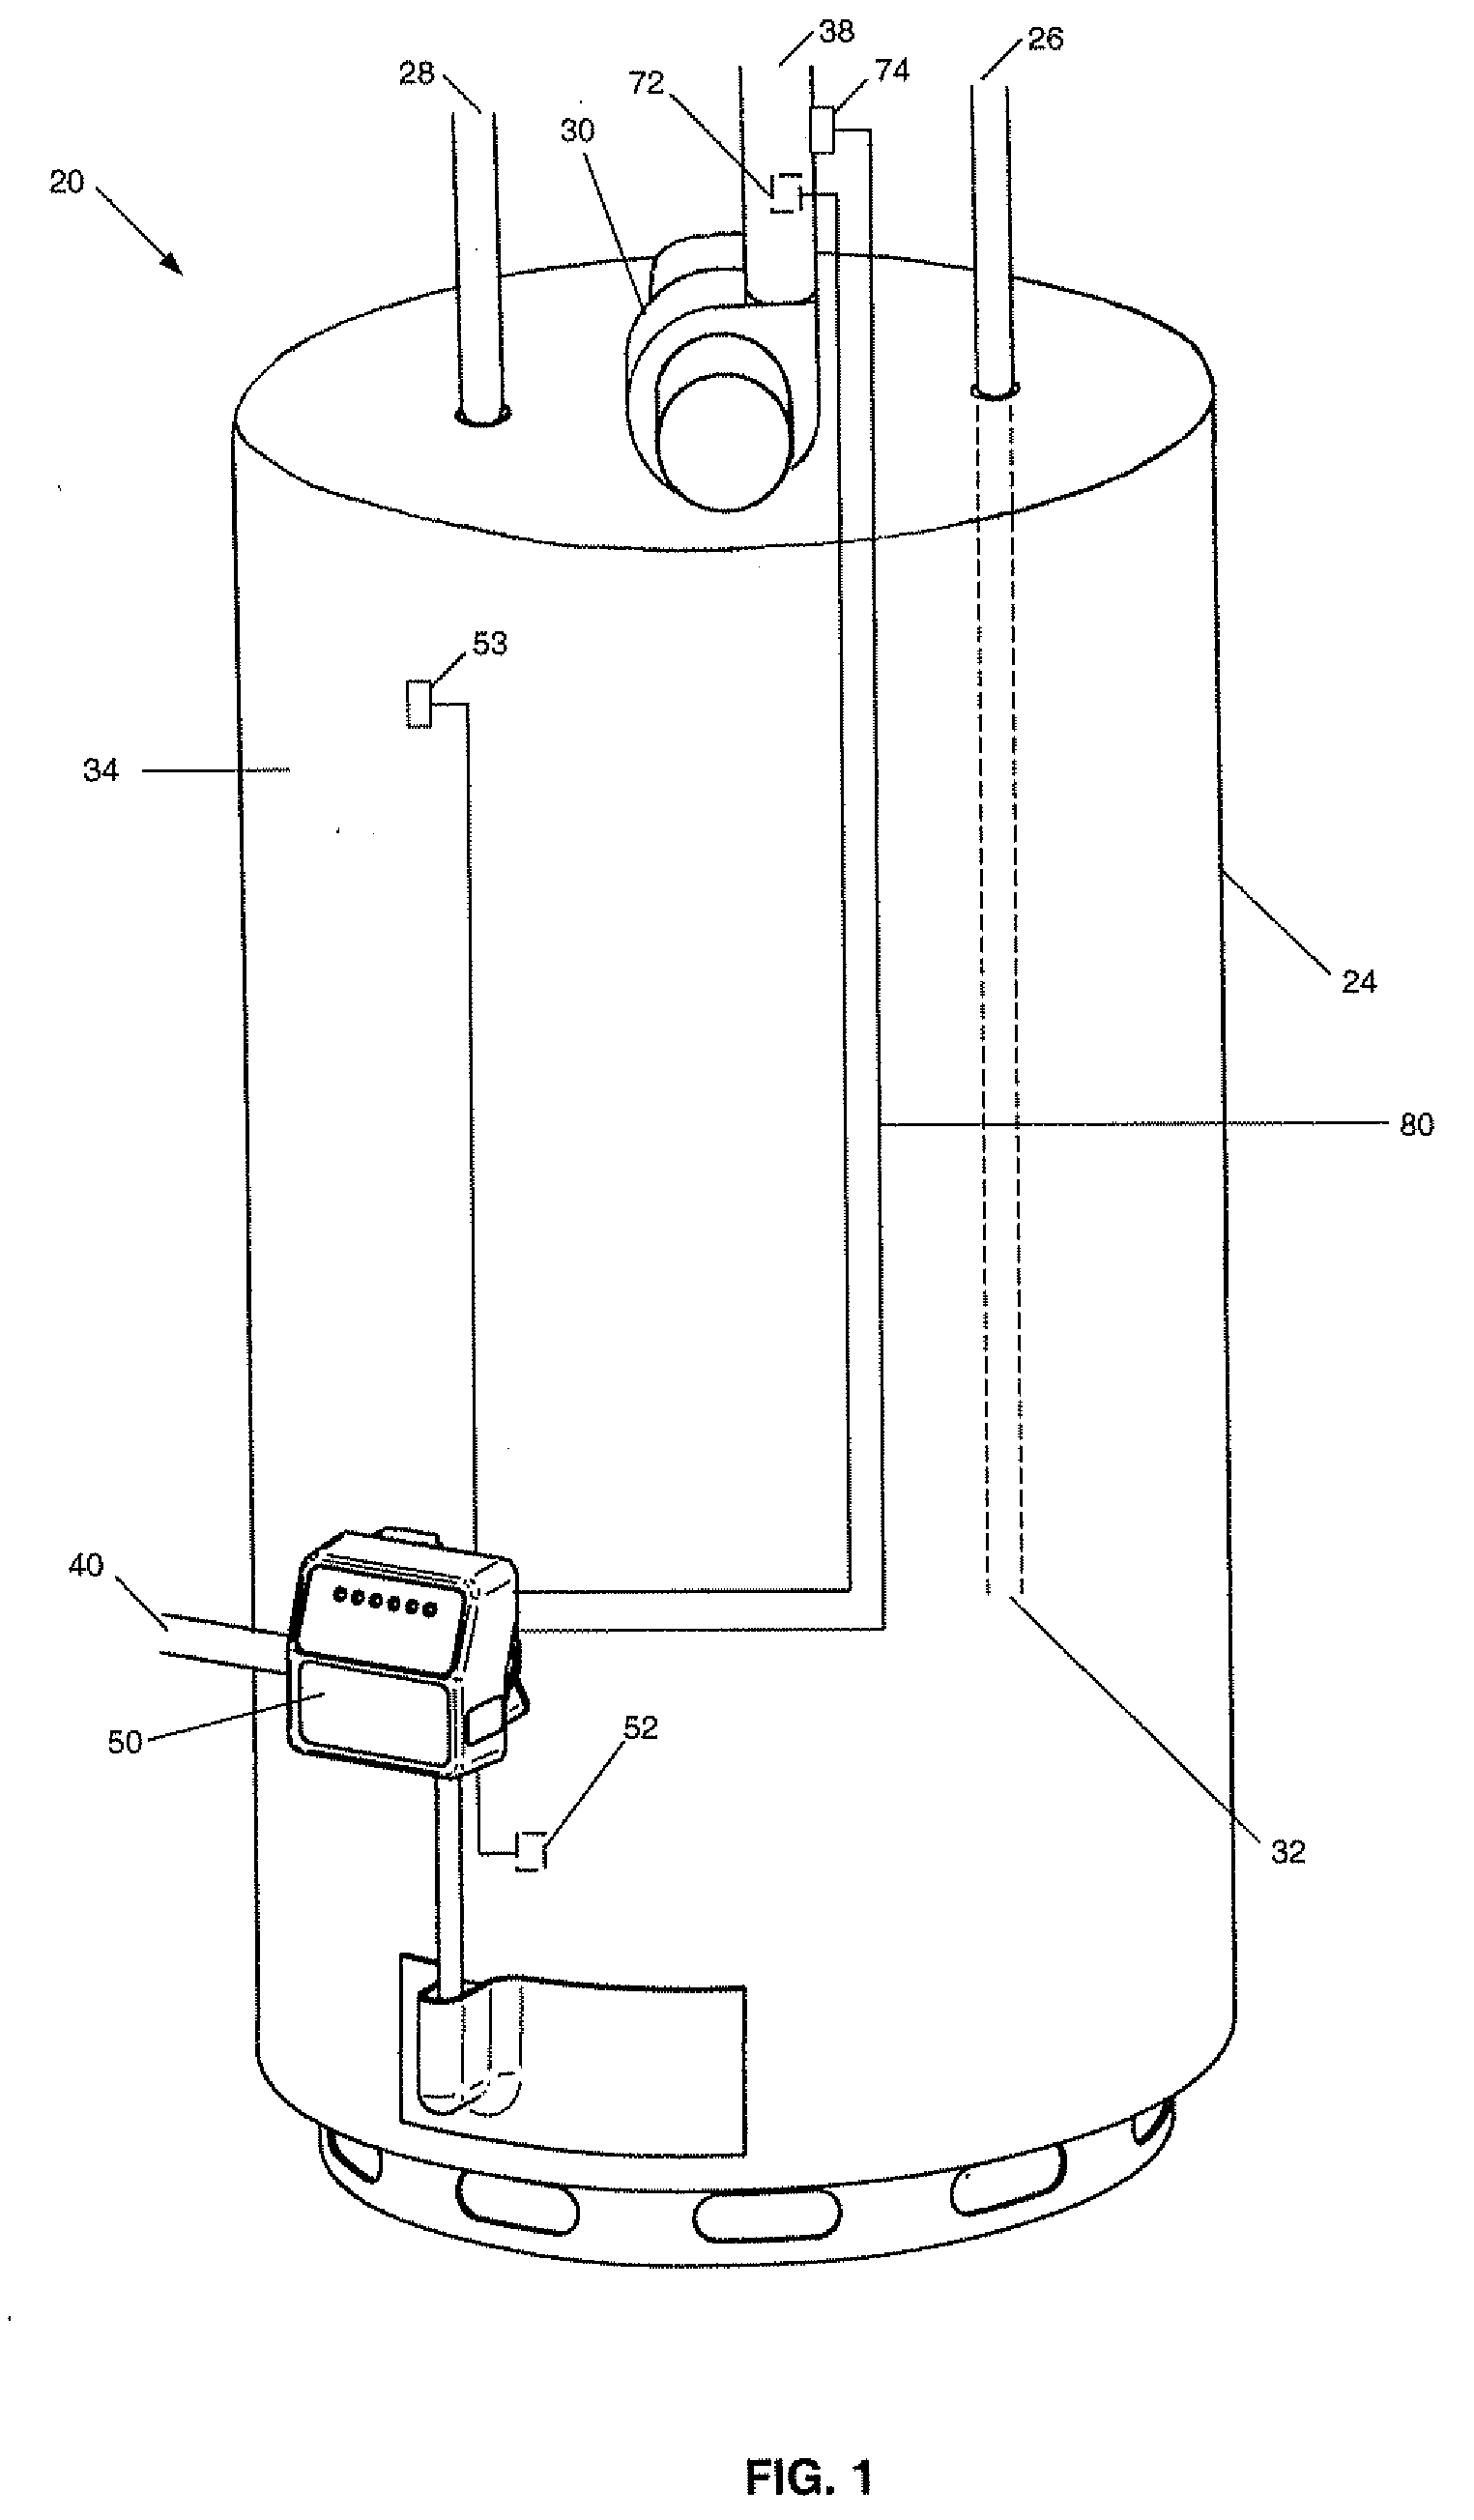 Systems and methods for controlling a water heater